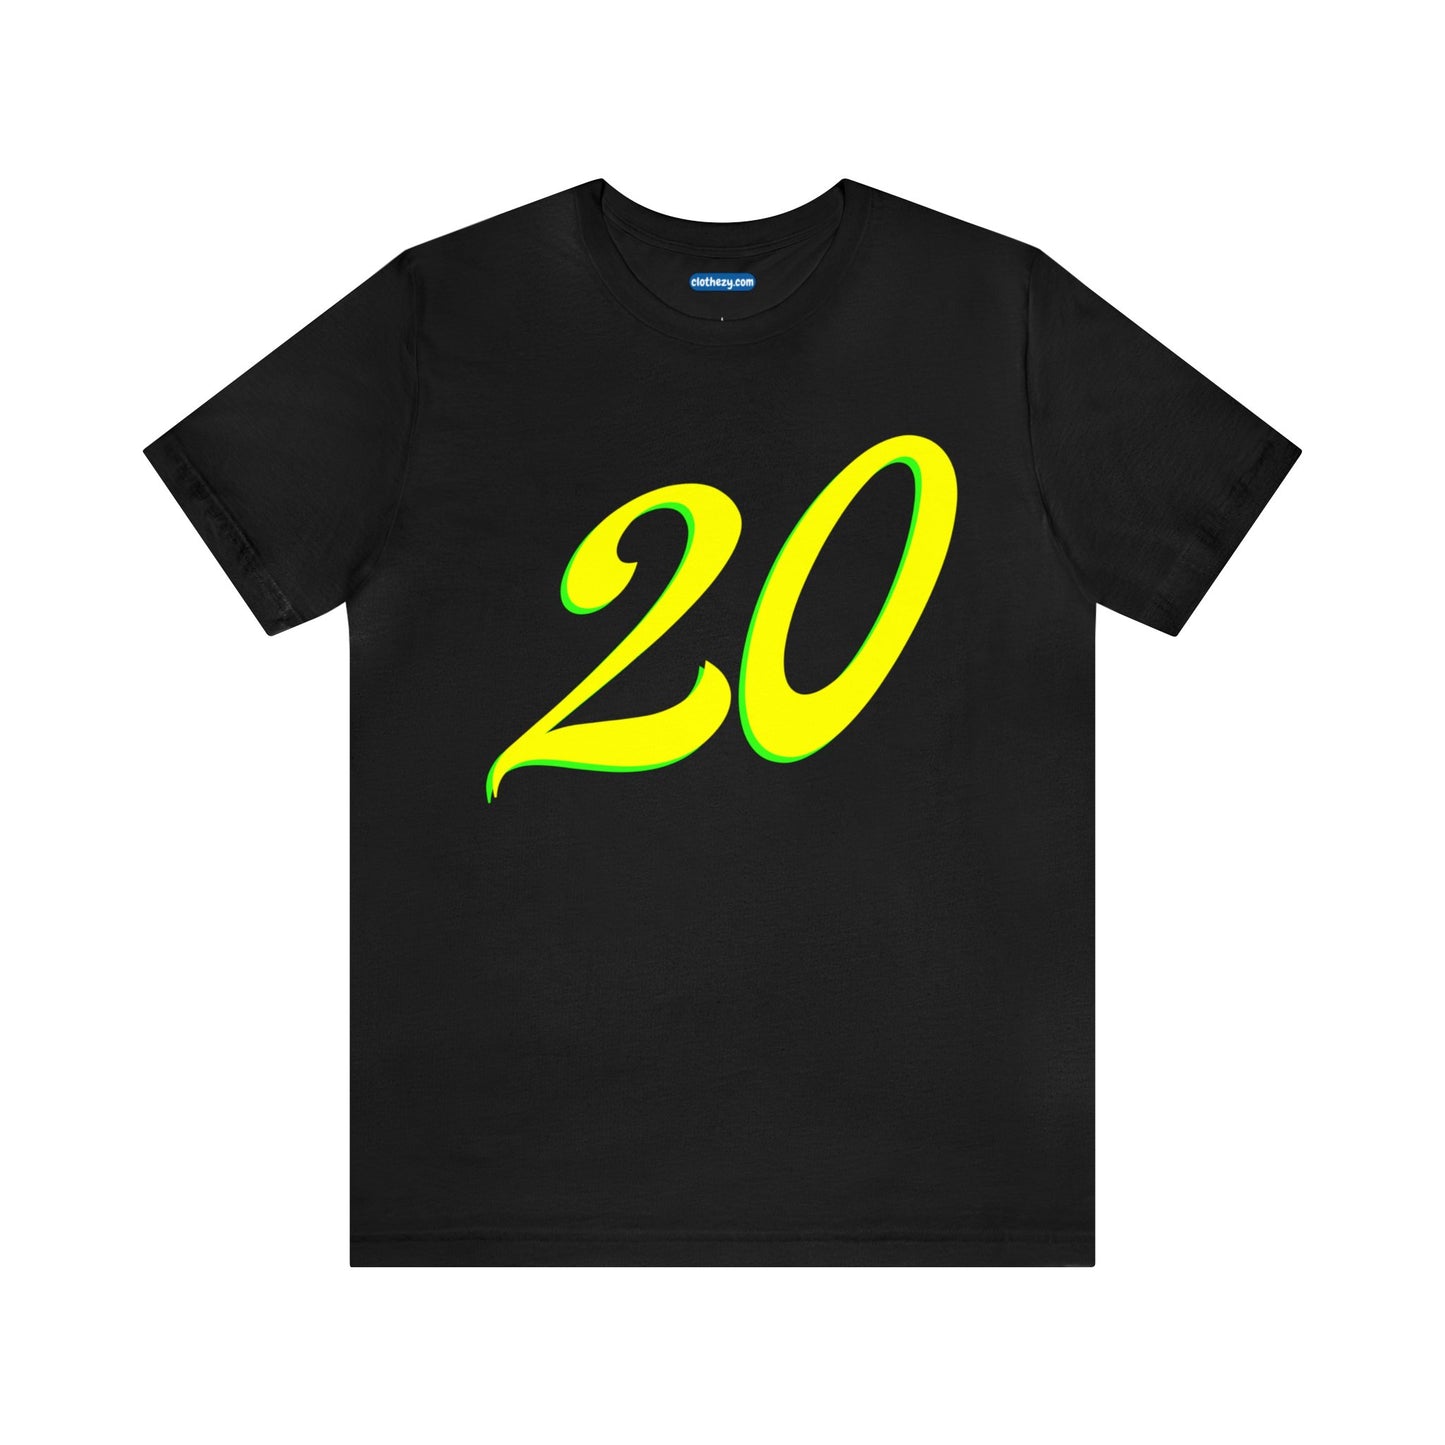 Number 20 Design - Soft Cotton Tee for birthdays and celebrations, Gift for friends and family, Multiple Options by clothezy.com in Dark Grey Heather Size Small - Buy Now